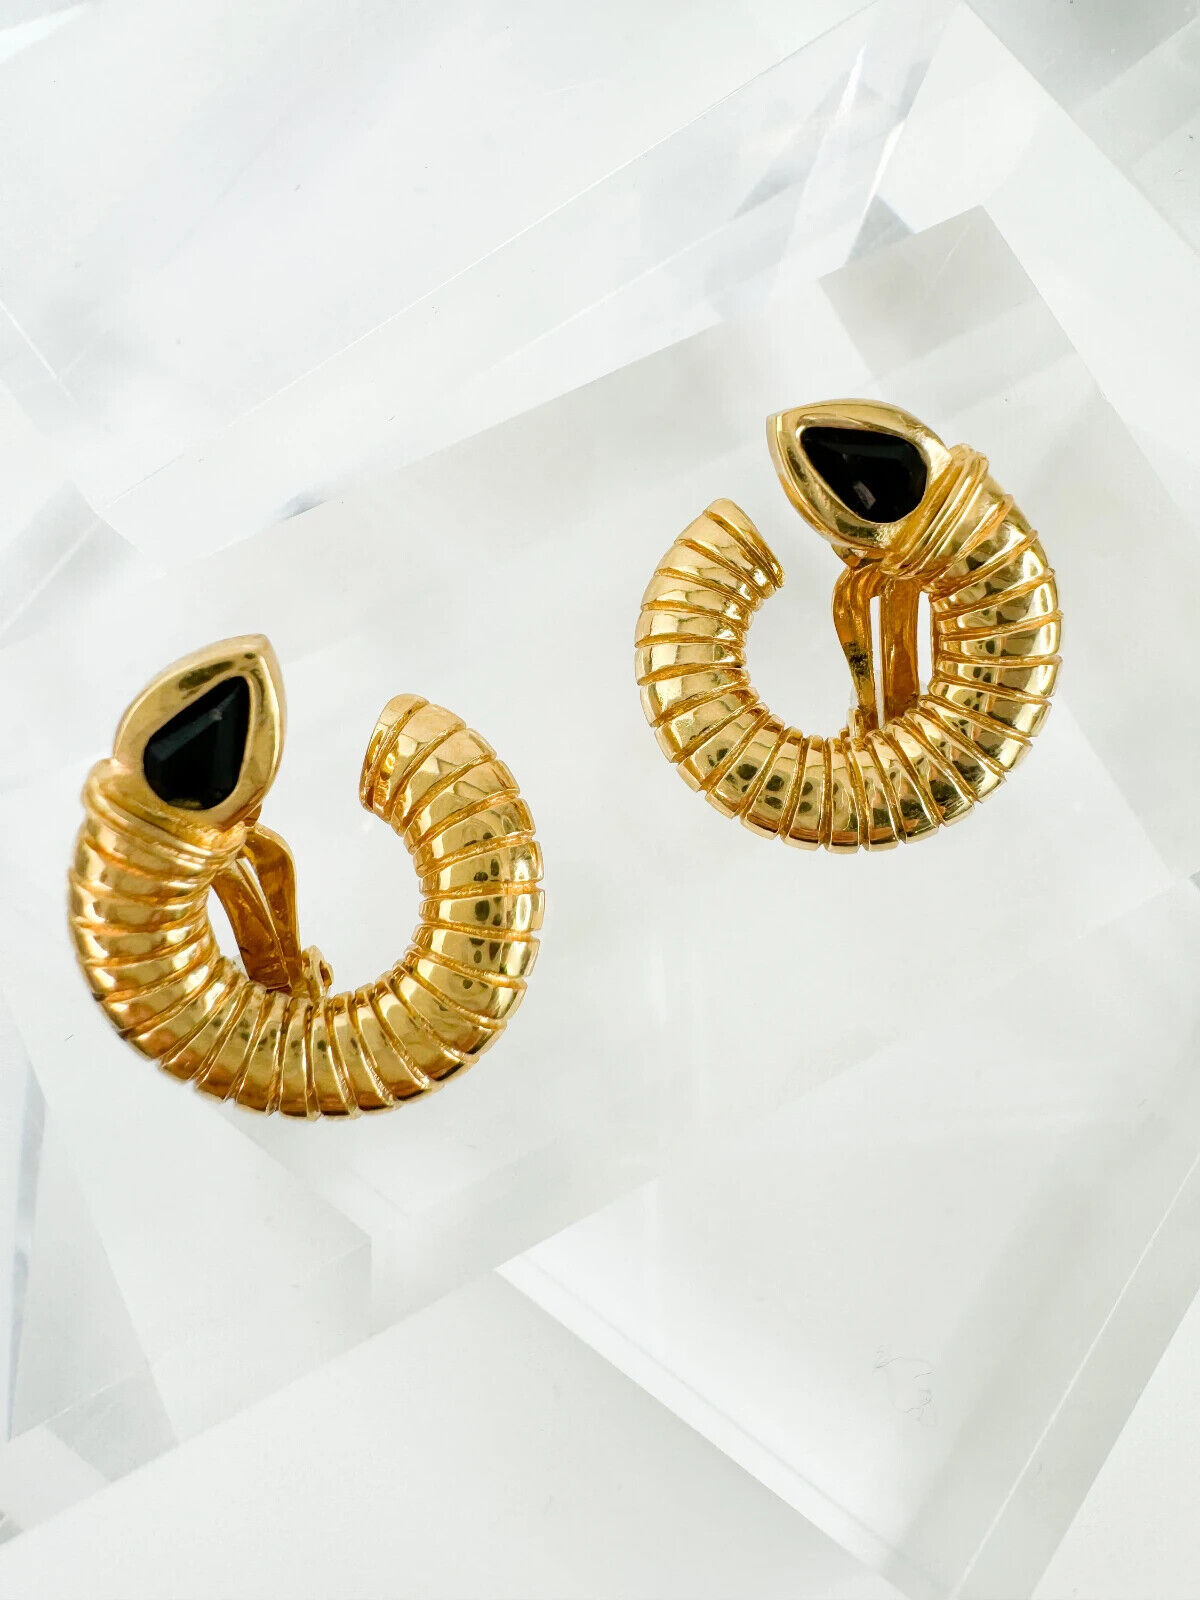 Givenchy gold Serpent  Earrings, Vintage Earrings, 18k Bridal Jewelry, Gold earrings, Wedding Jewelry, Jewelry for Women, casual vintage